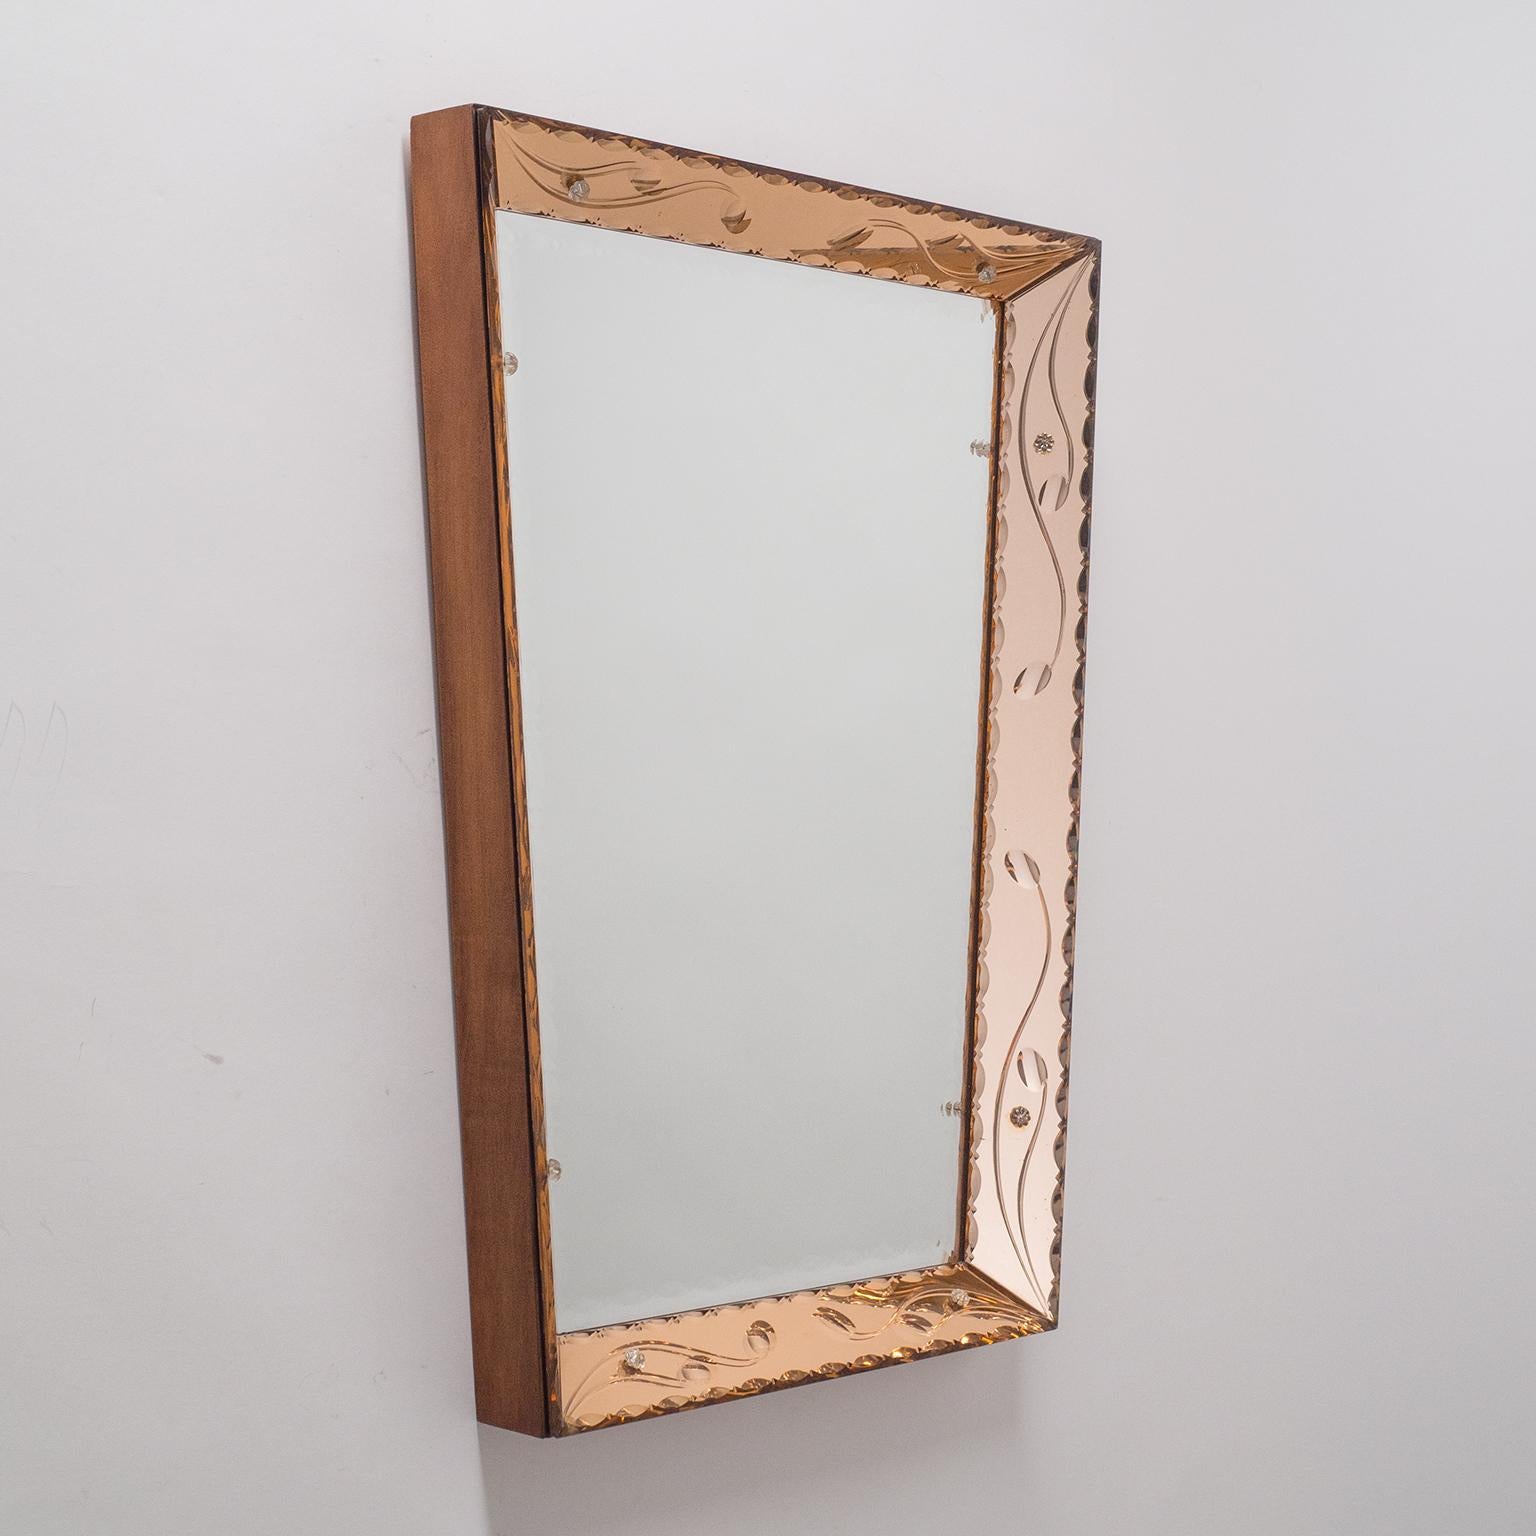 Beautiful Italian trapeze mirror with dual color mirrors. Inserted into a deep wooden frame are sheets of rosé-colored as well as a clear mirror. Each of these are intricately beveled, scalopped and cut with floral motifs. Width at the bottom is